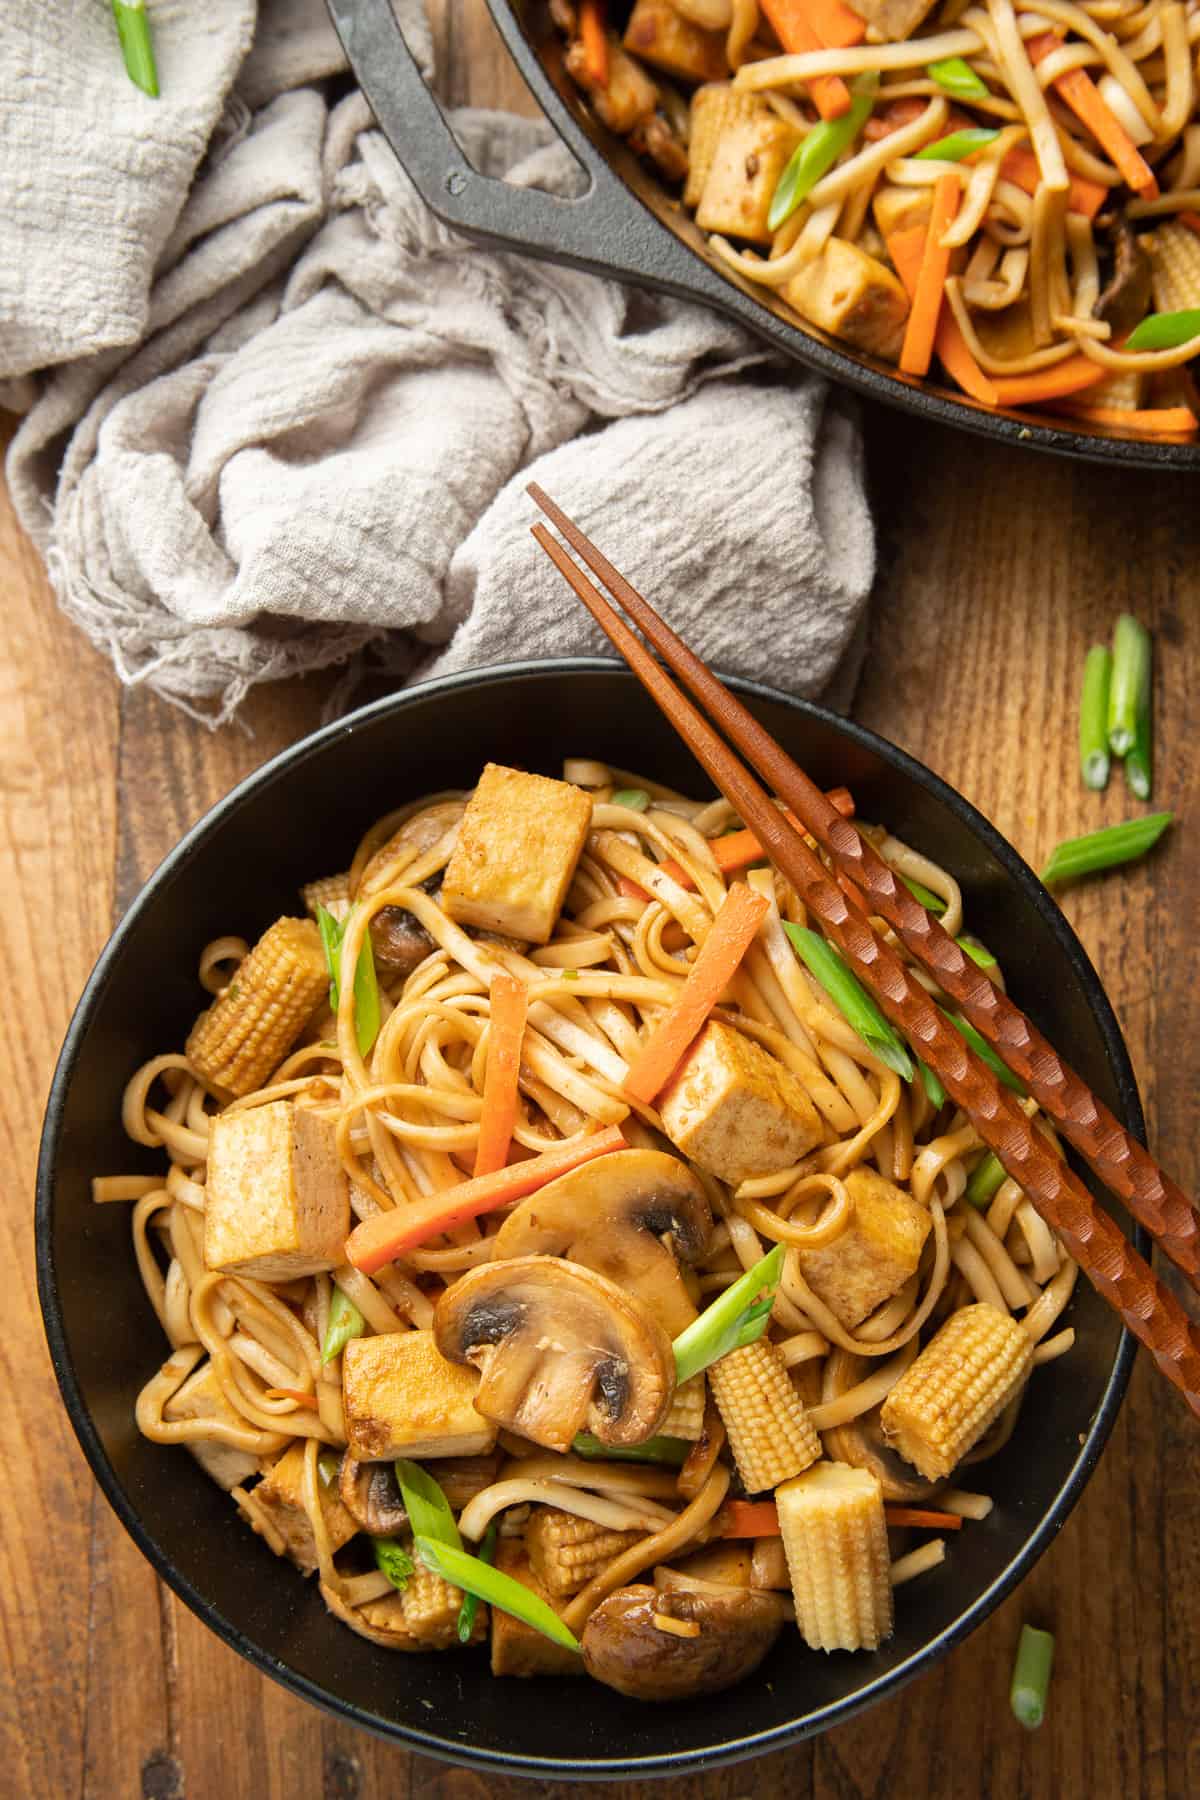 Wooden surface set with skillet, napkin and bowl of Vegan Lo Mein.